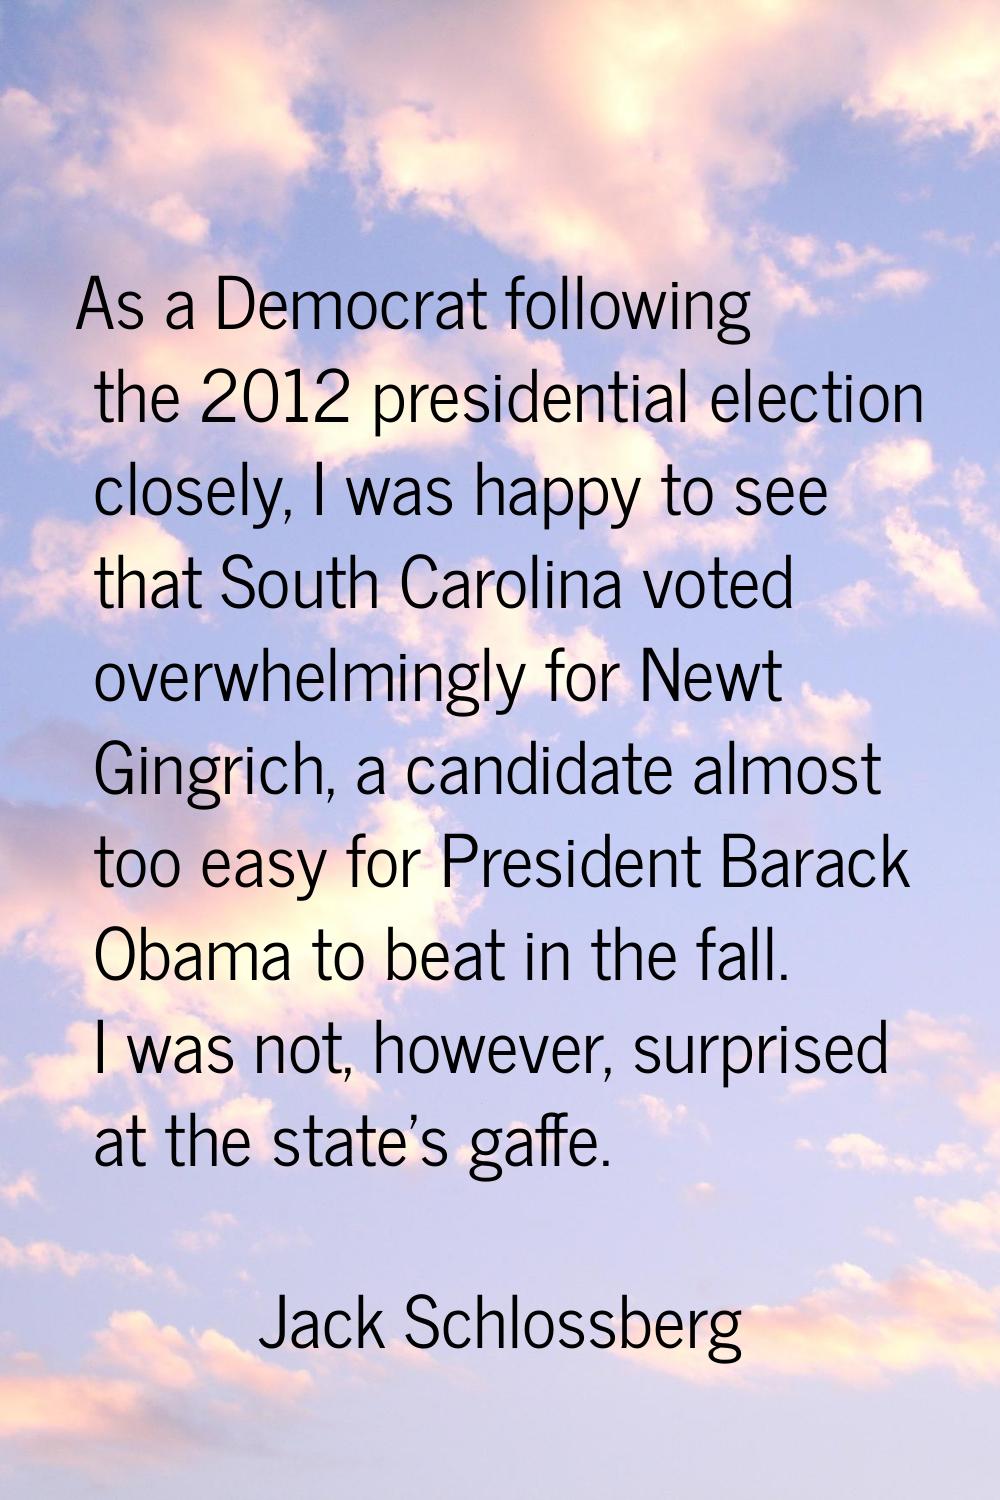 As a Democrat following the 2012 presidential election closely, I was happy to see that South Carol